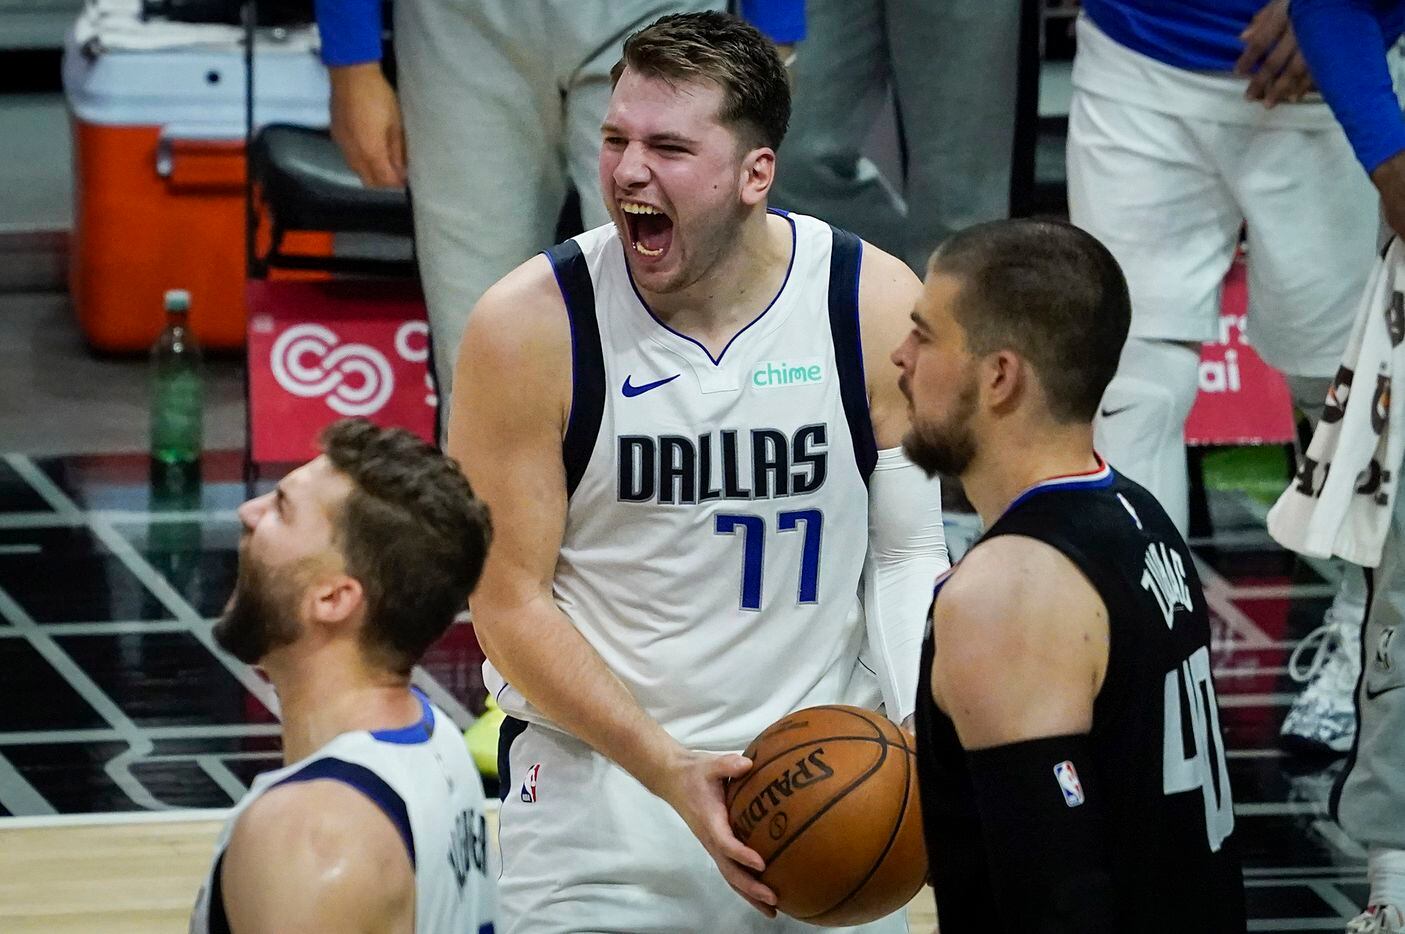 Dallas Mavericks guard Luka Doncic (77) celebrates with forward Maxi Kleber (42) as LA Clippers center Ivica Zubac (40) walks away after the final buzzer of the Mavericks 127-121 victory in an NBA playoff basketball game at Staples Center on Wednesday, May 26, 2021, in Los Angeles. 